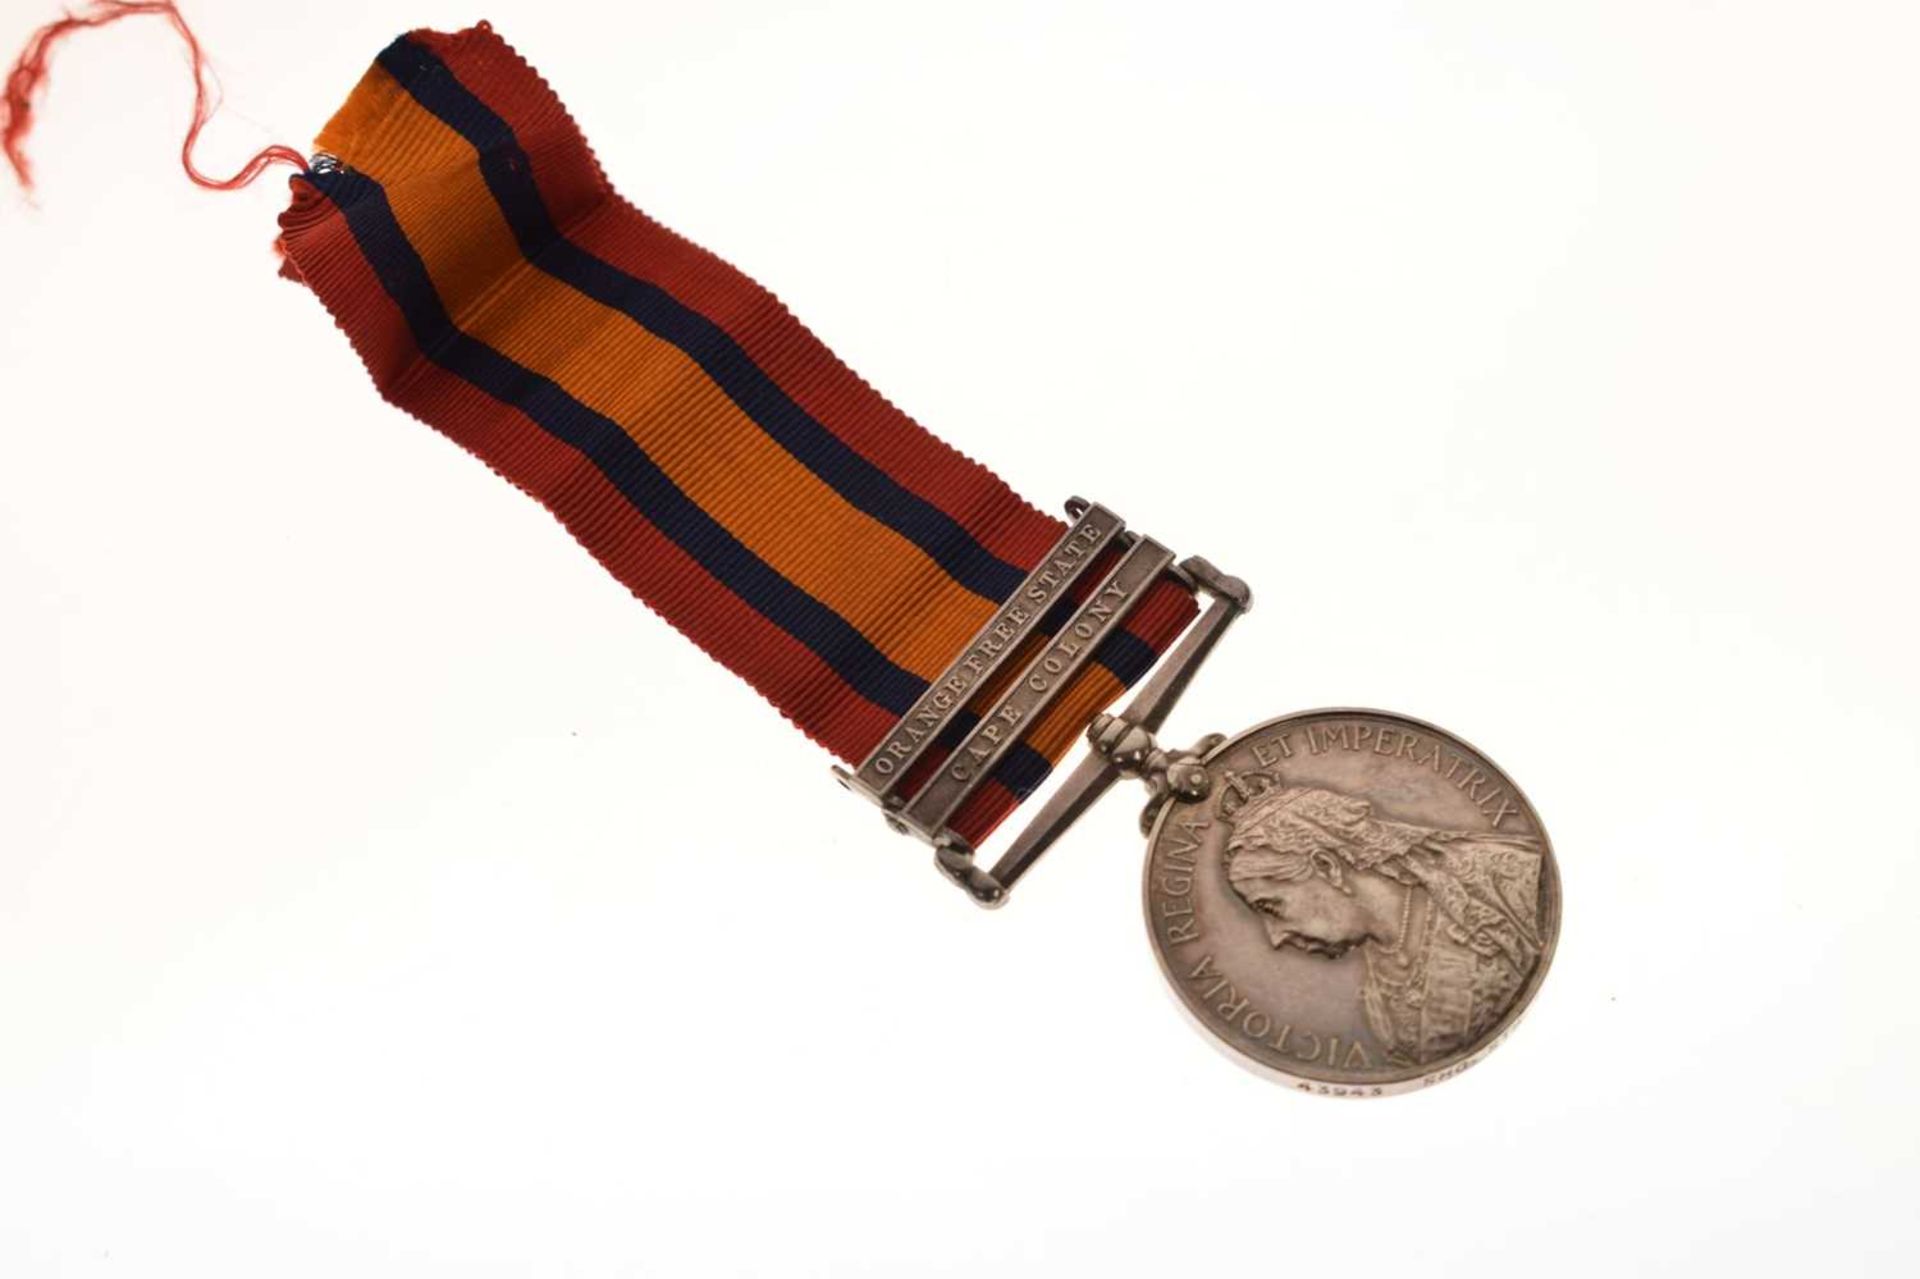 Queen's South Africa Medal 1899-1902 - Image 2 of 11